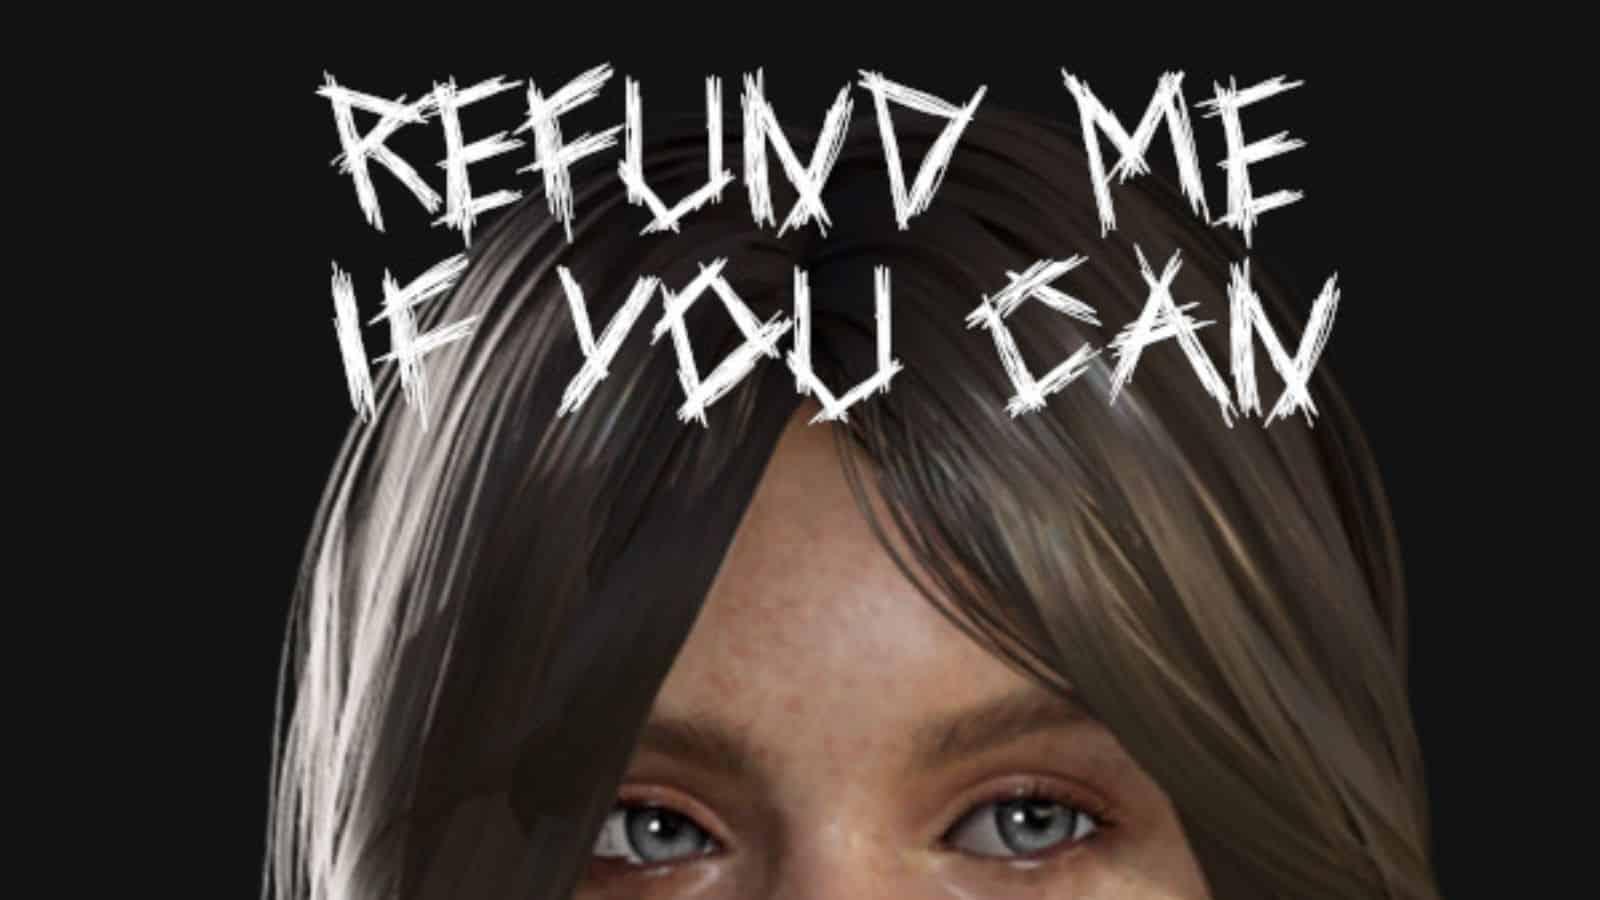 The refund me if you can writing over Sarahs face